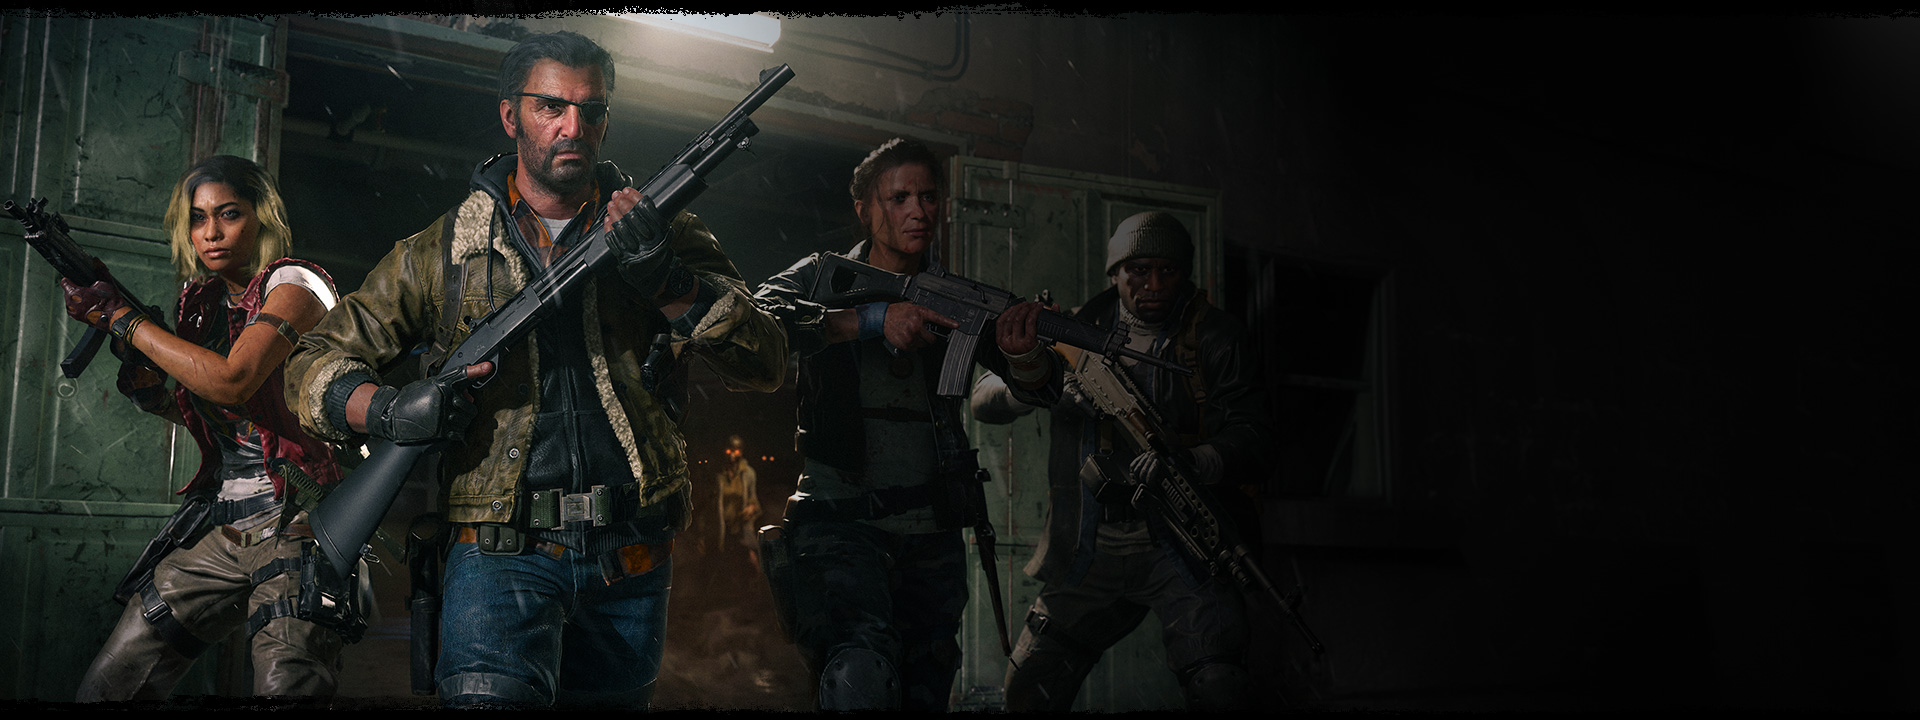 Four characters exiting a warehouse with their guns raised as a zombie stands behind them with glowing orange eyes.